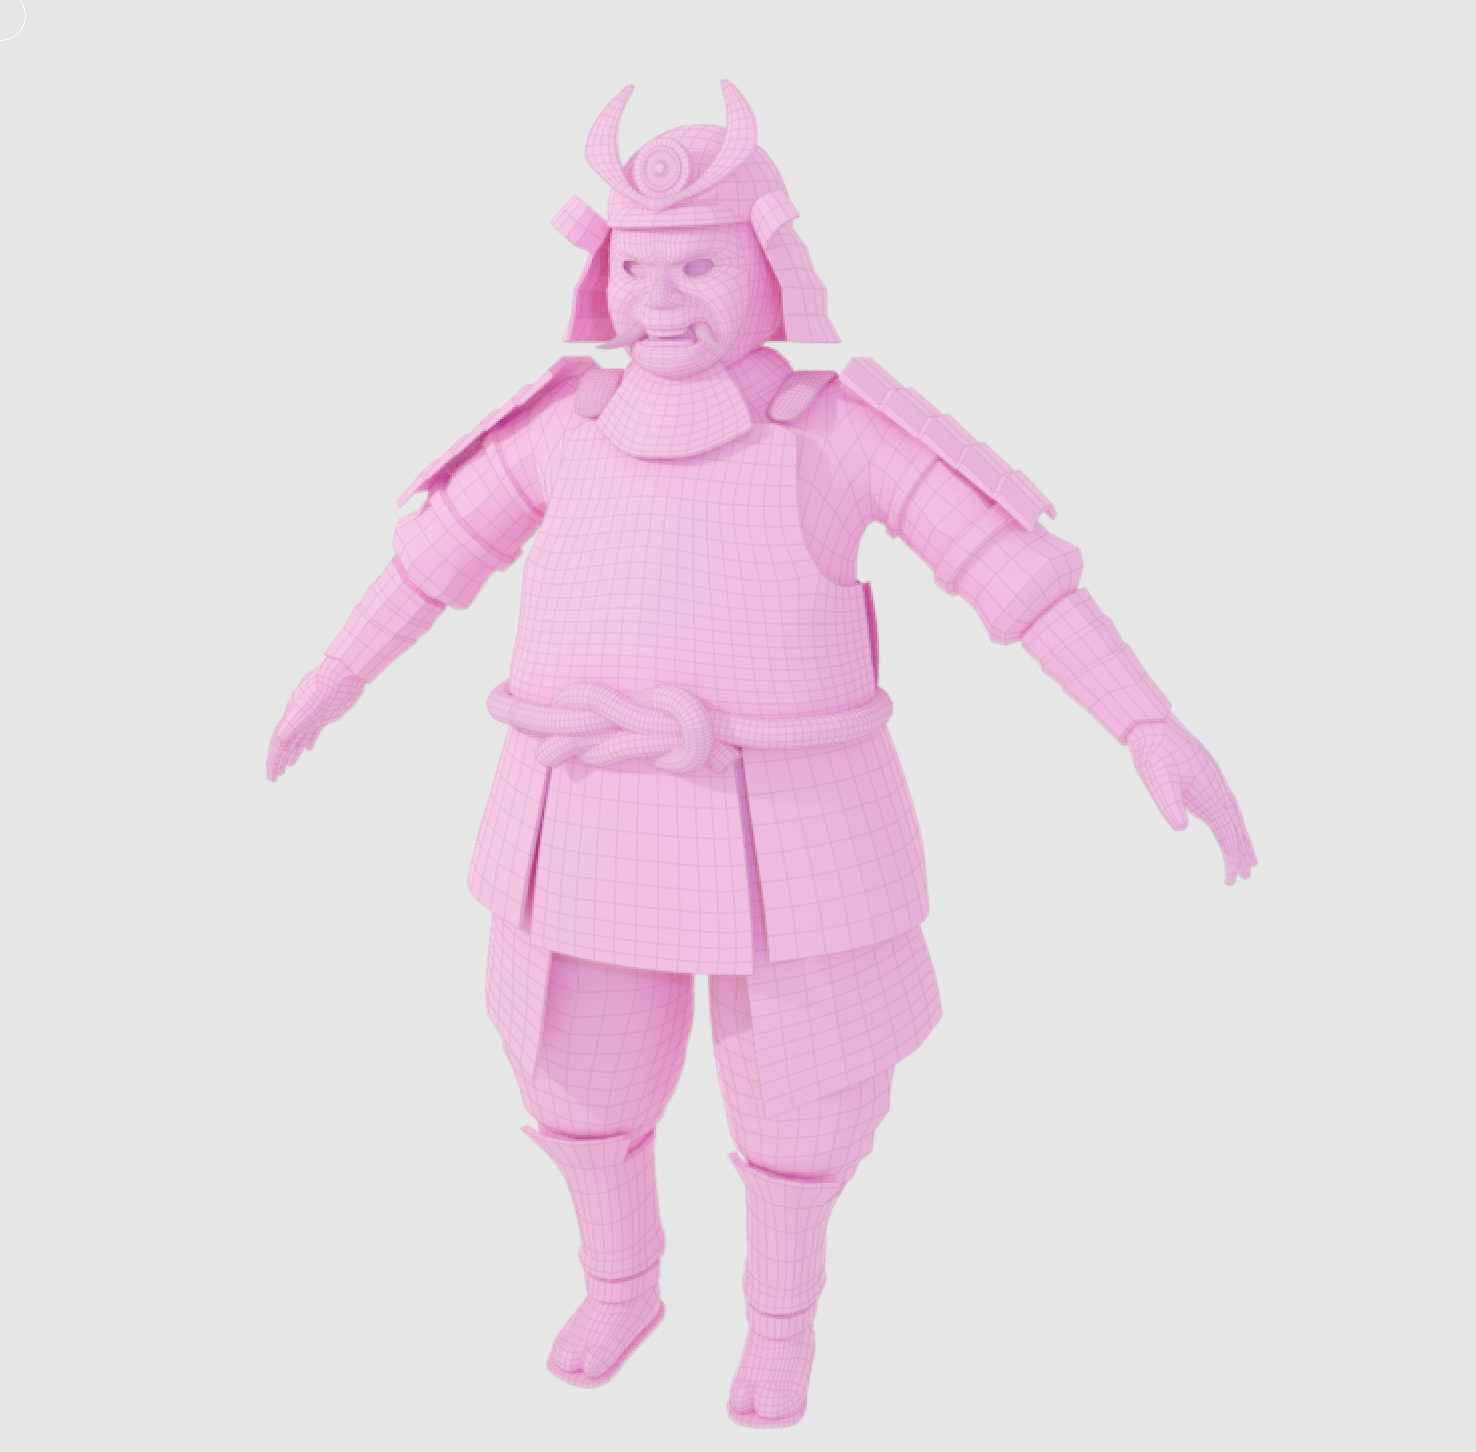 Wireframe clay render of mini-boss